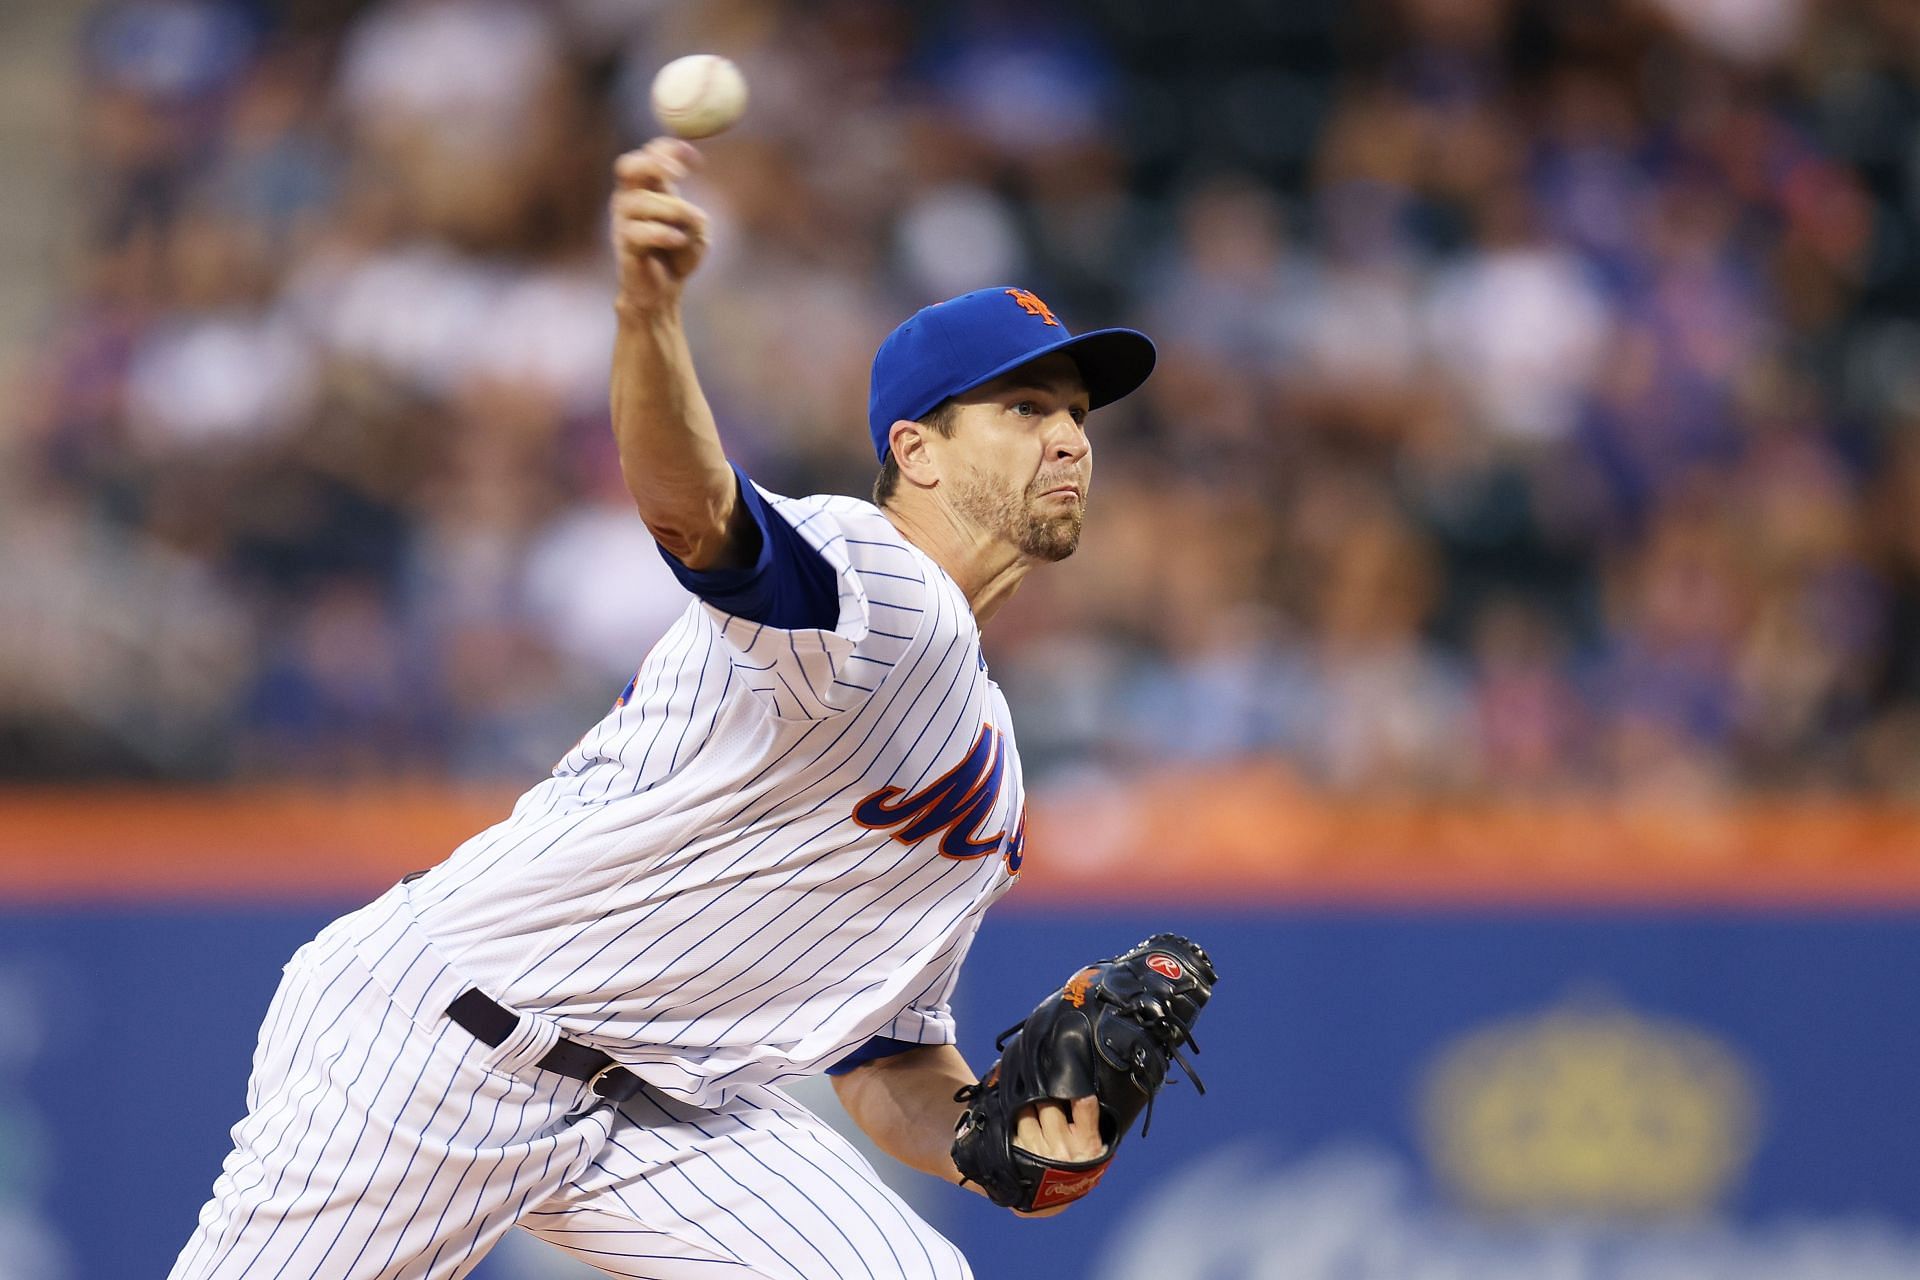 MLB on X: Jacob deGrom's season is officially over. He put up